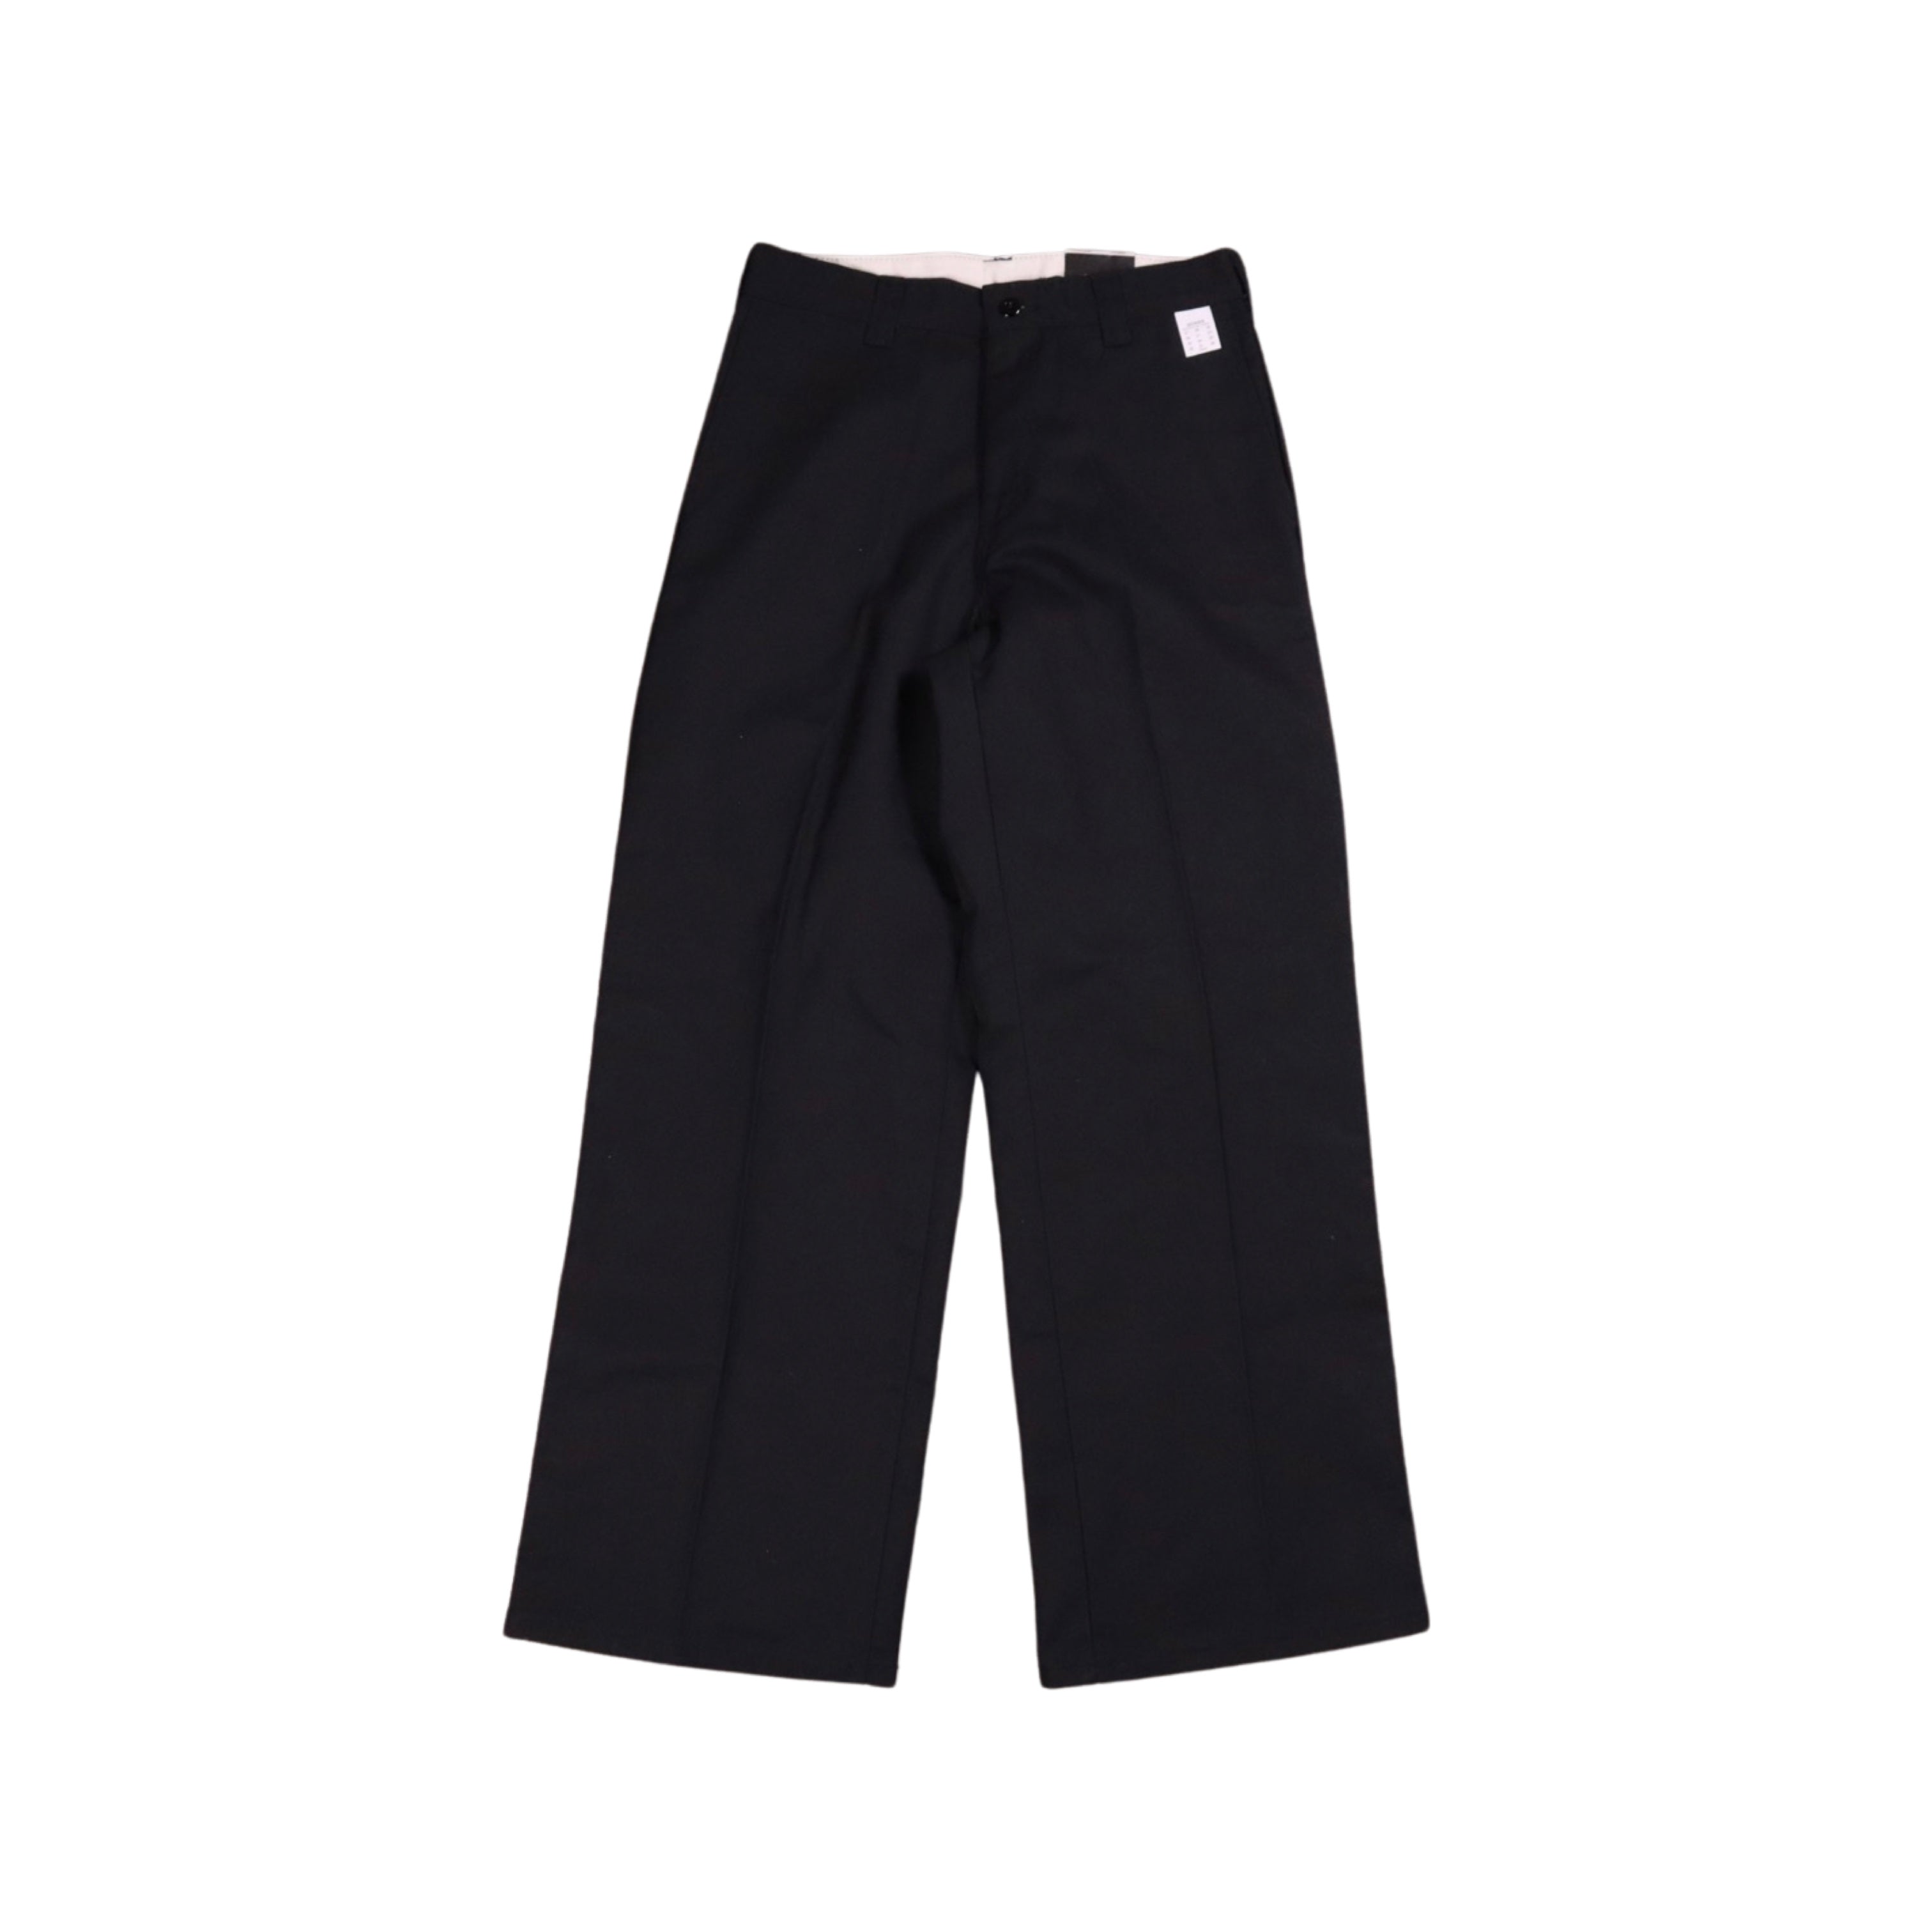 New with Tags Black Dickies Straight Leg Pants (28”)